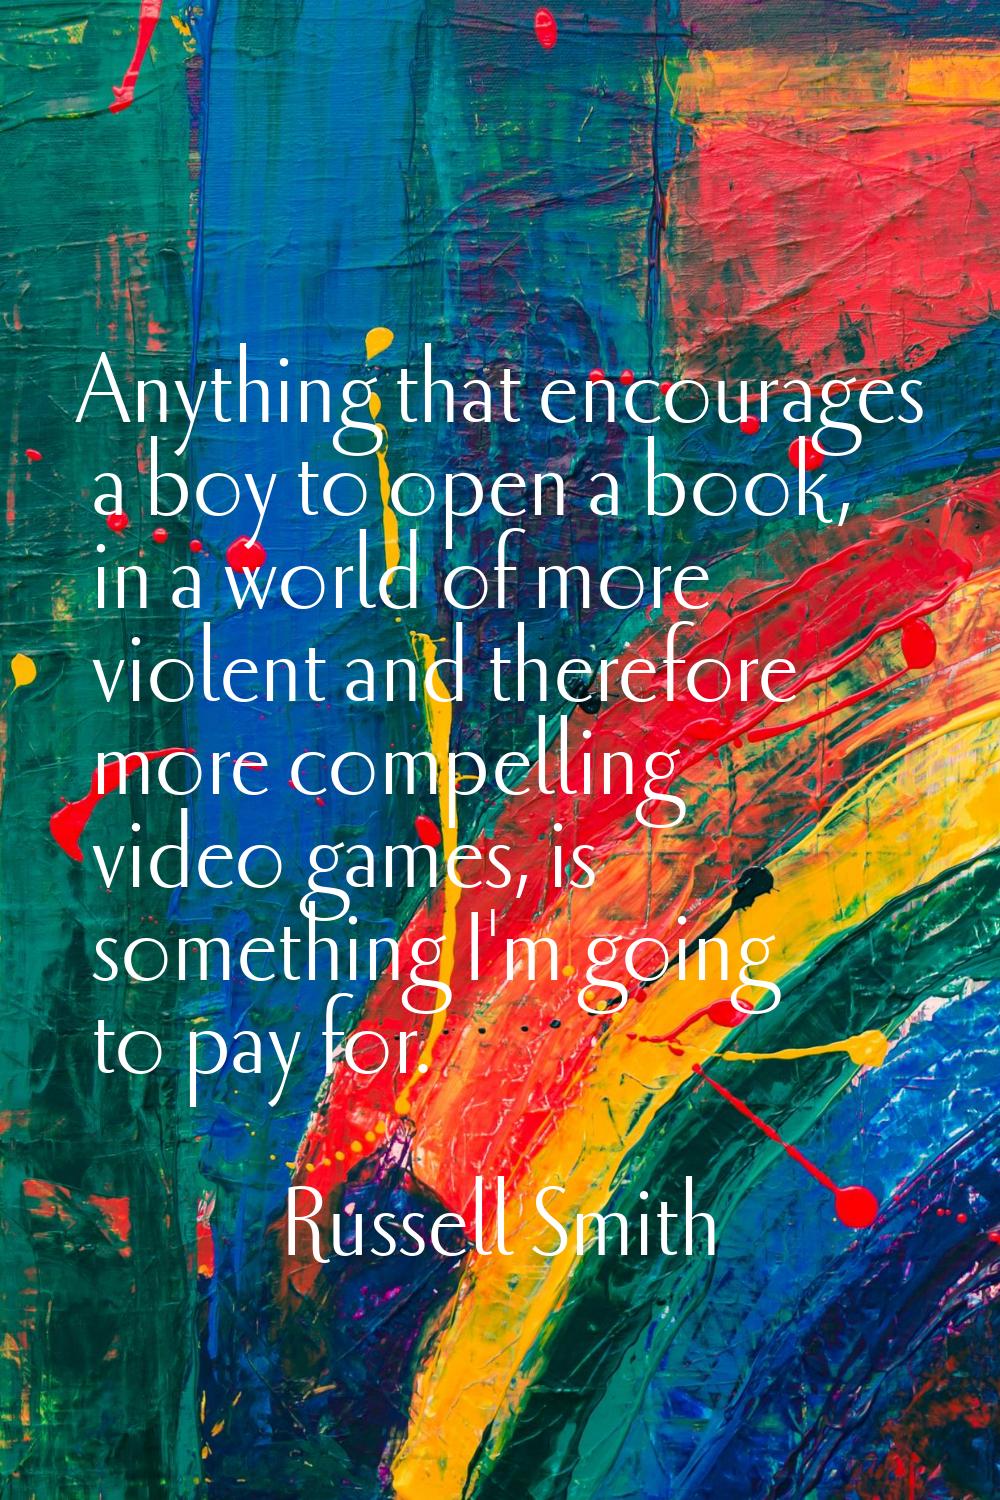 Anything that encourages a boy to open a book, in a world of more violent and therefore more compel